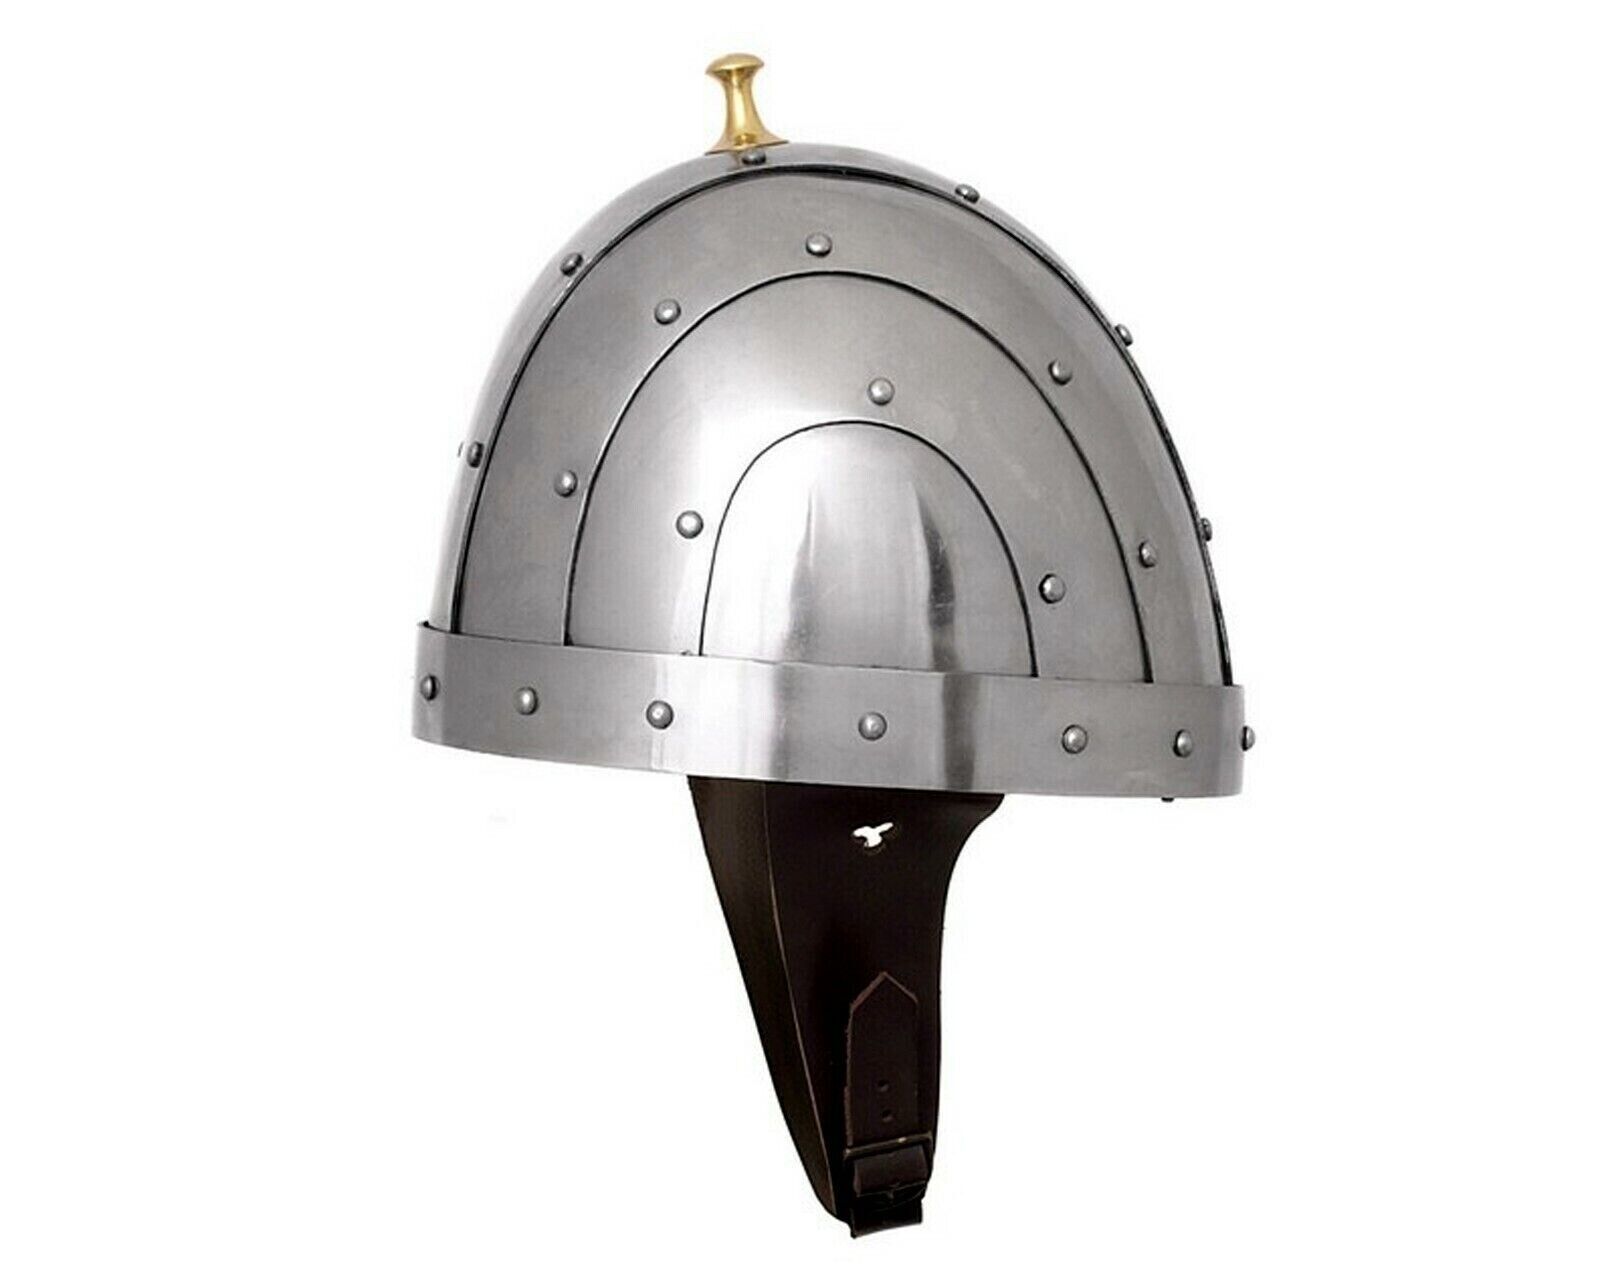 16 Gauge SCA Medieval Armour Knight Helmet Banded kettle hat 14 Ct